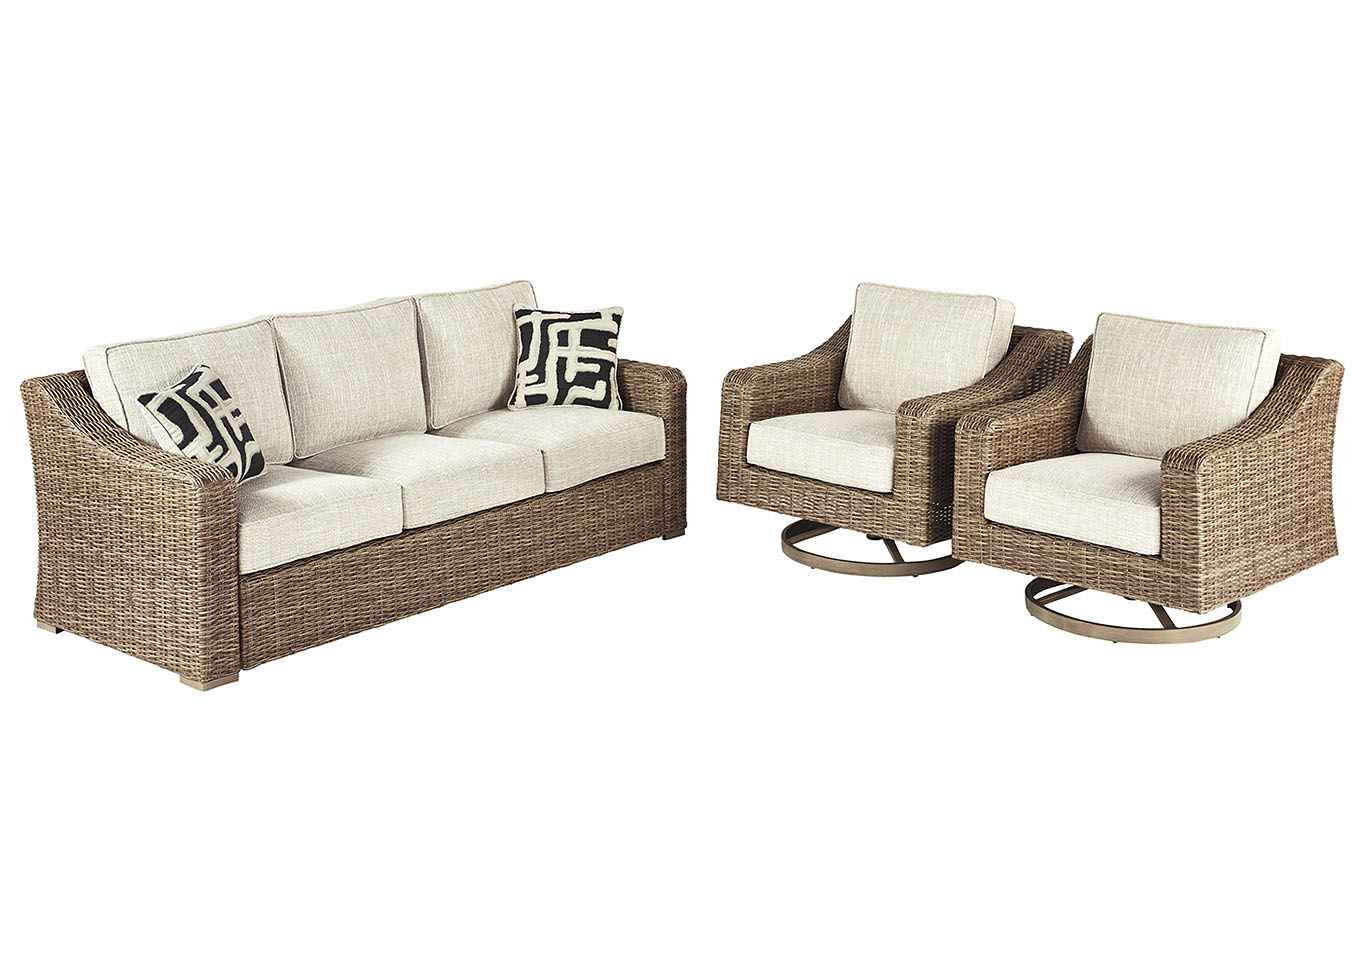 Beachcroft 3 Piece Outdoor Seating Set, Ashley Furniture Outdoor Seating Sets